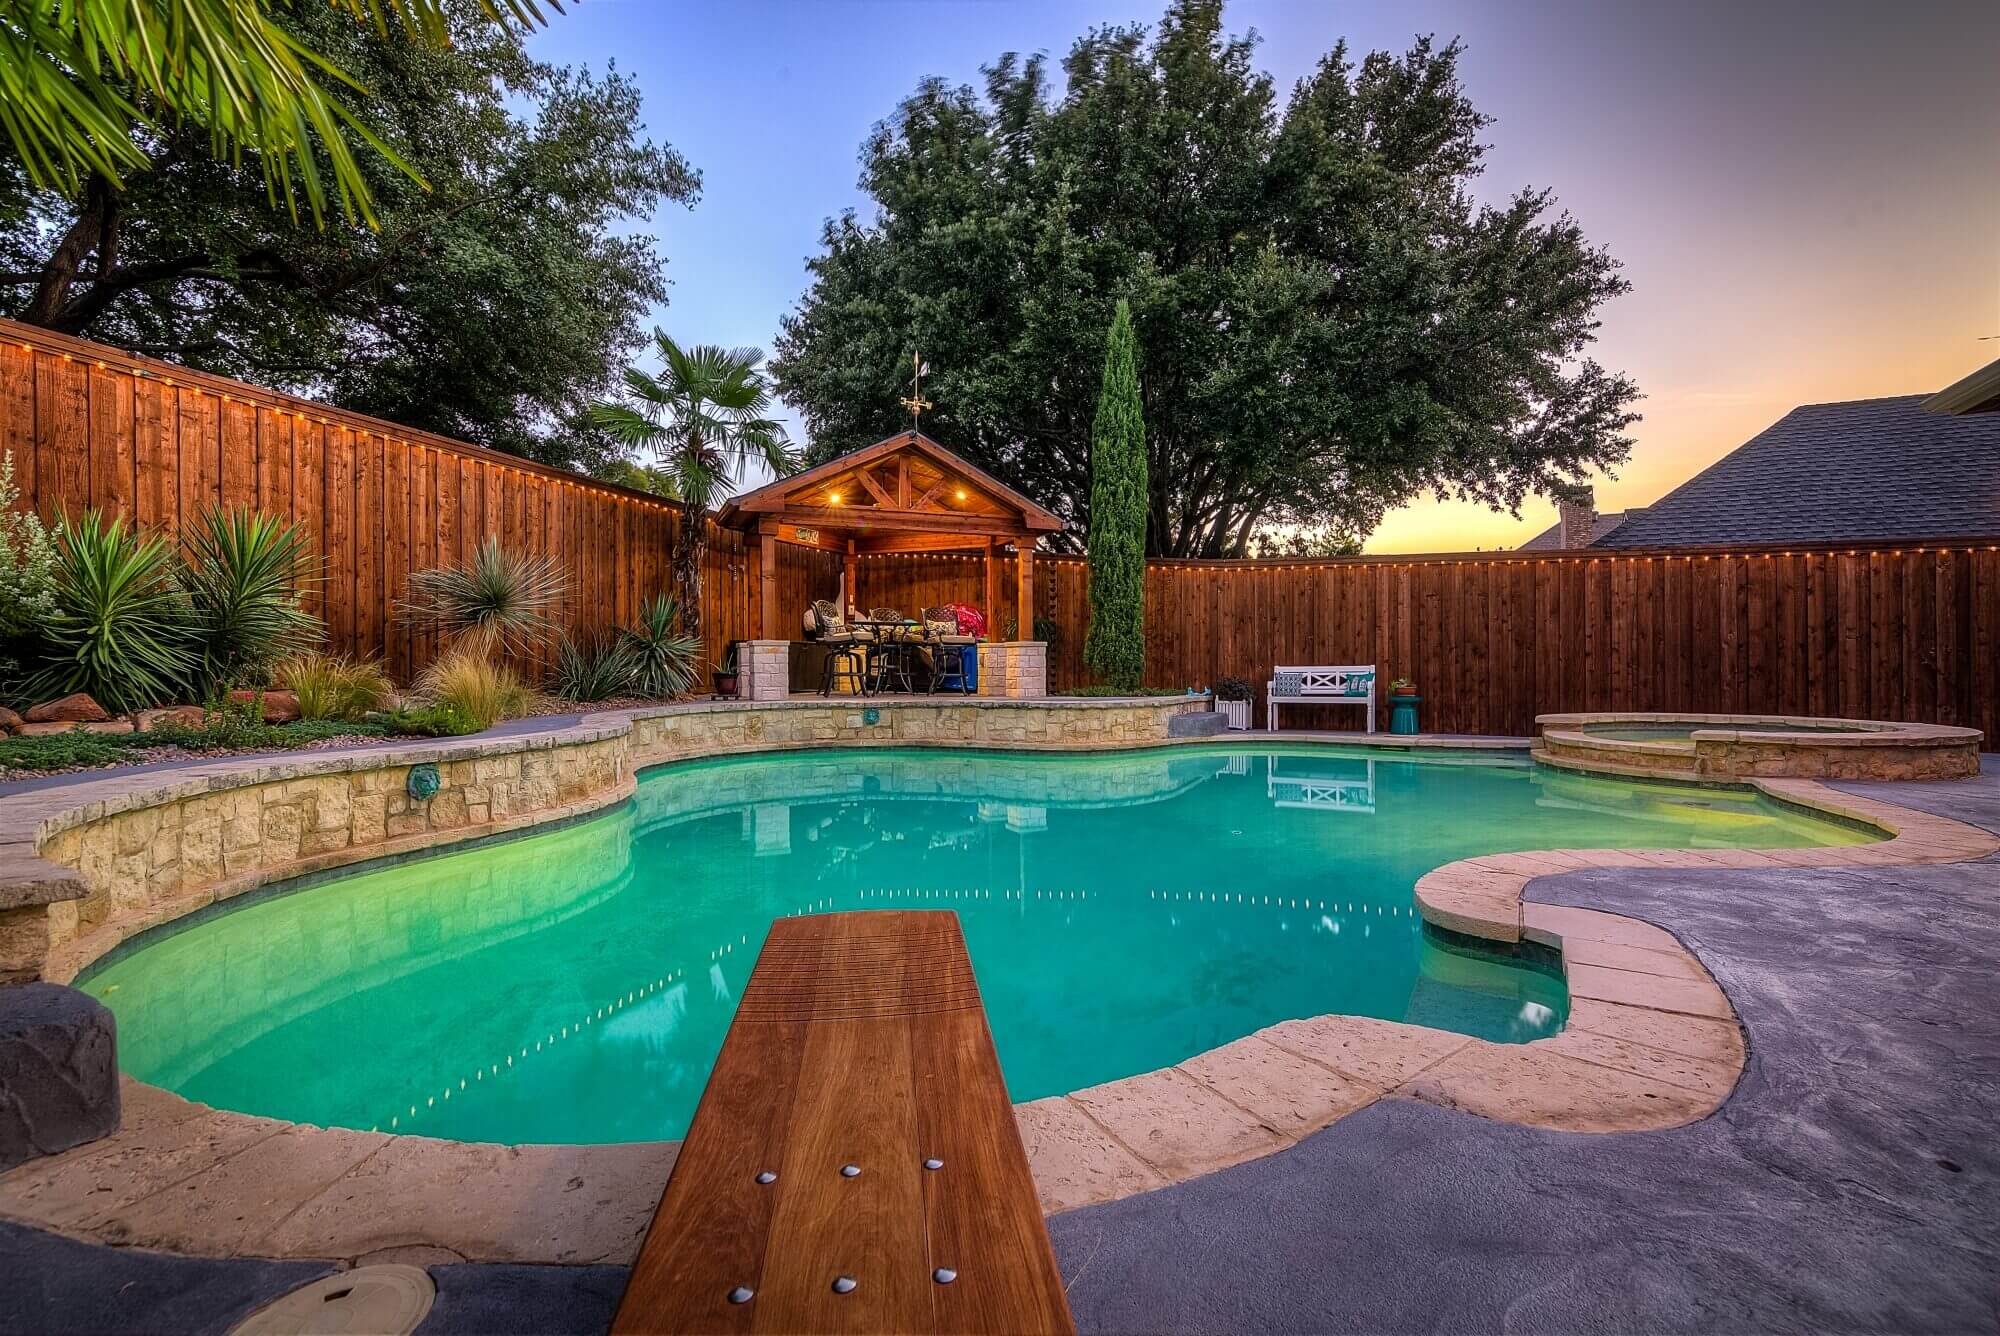 backyard outdoor pool paradise with diving board design idea